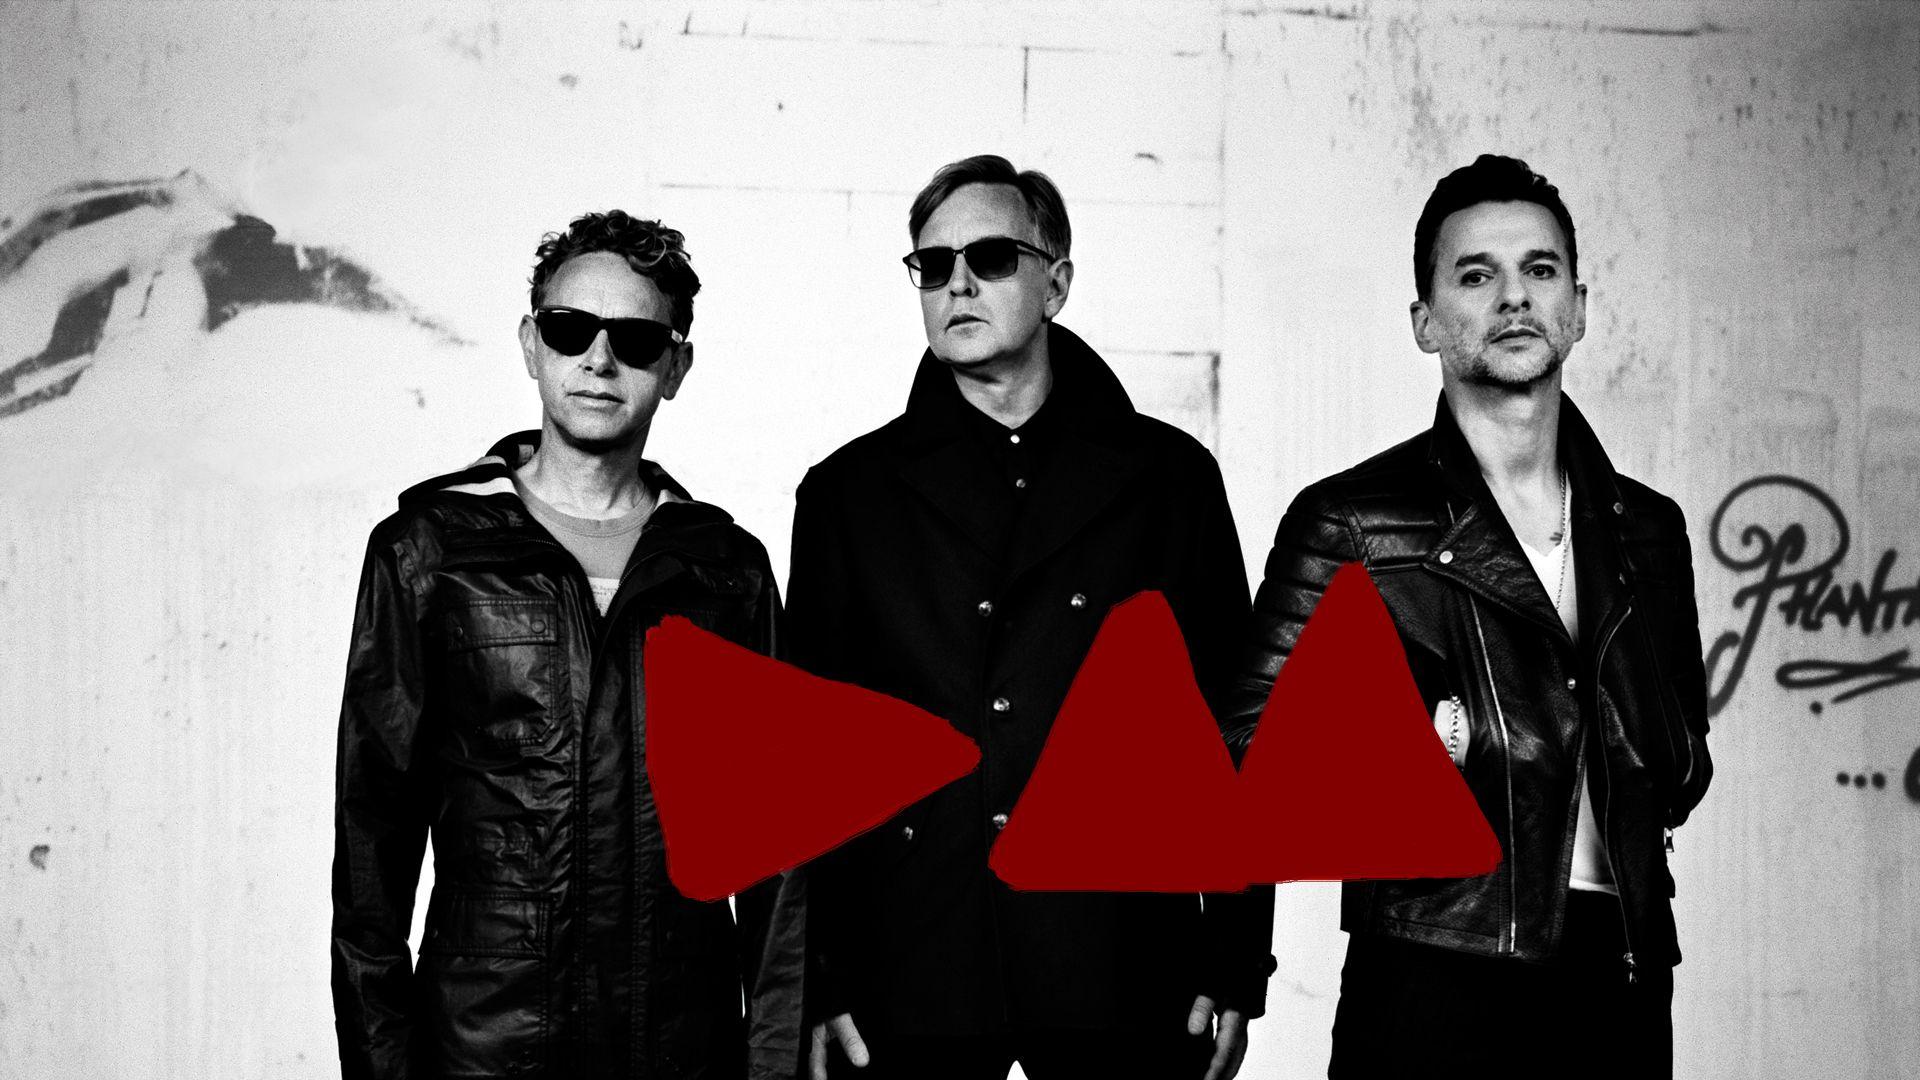 Depeche Mode Wallpapers HD Backgrounds, Image, Pics, Photos Free